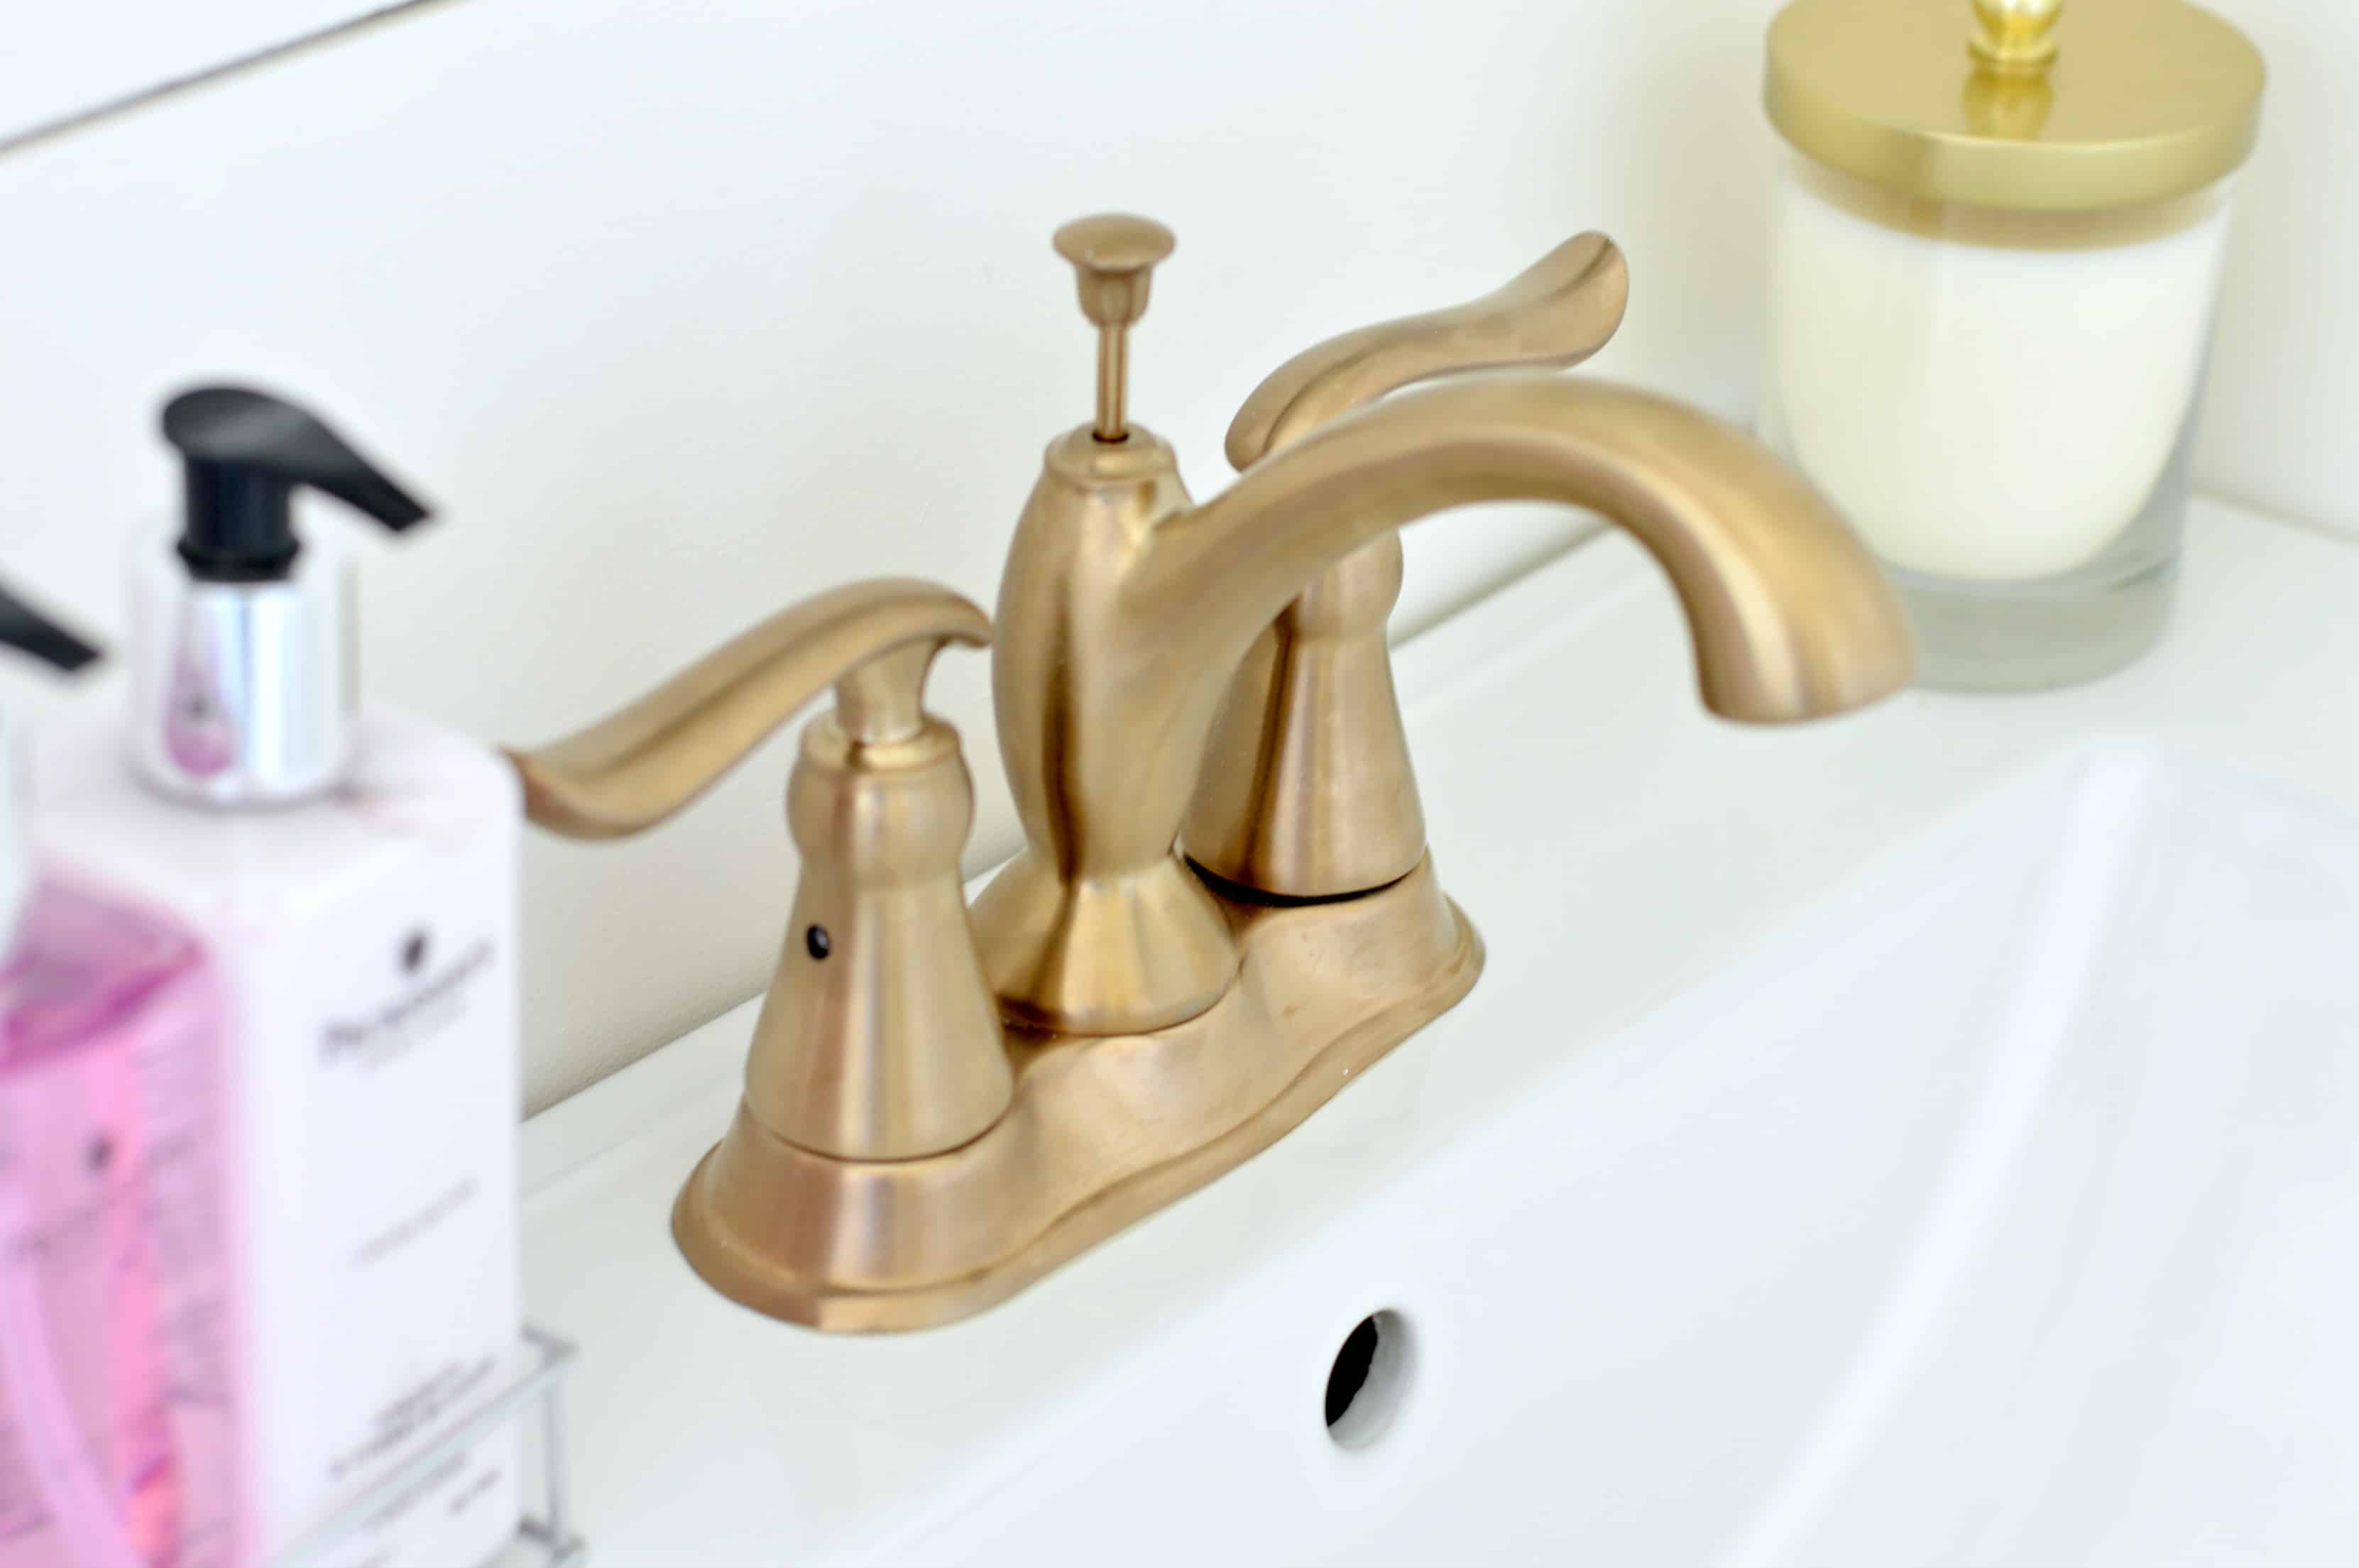 A close-up of a white sink with antique gold faucet and two handles